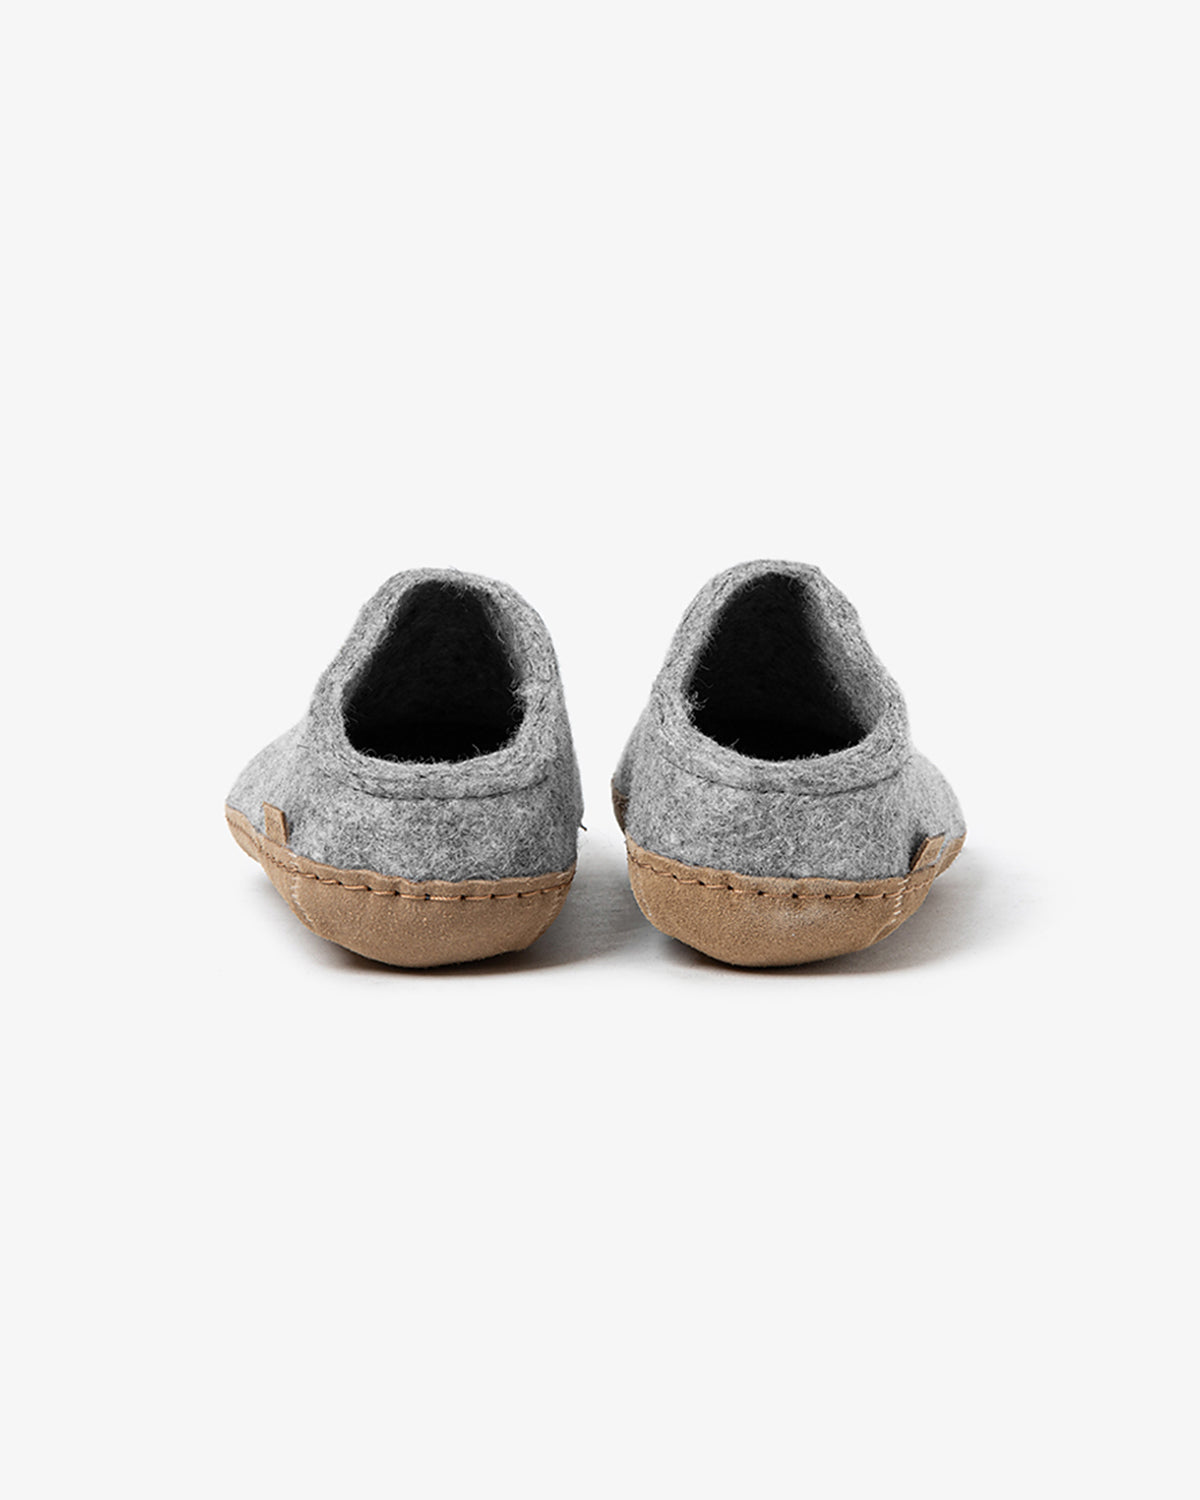 THE SLIP-ON WITH LEATHER SOLE (WOMEN'S)